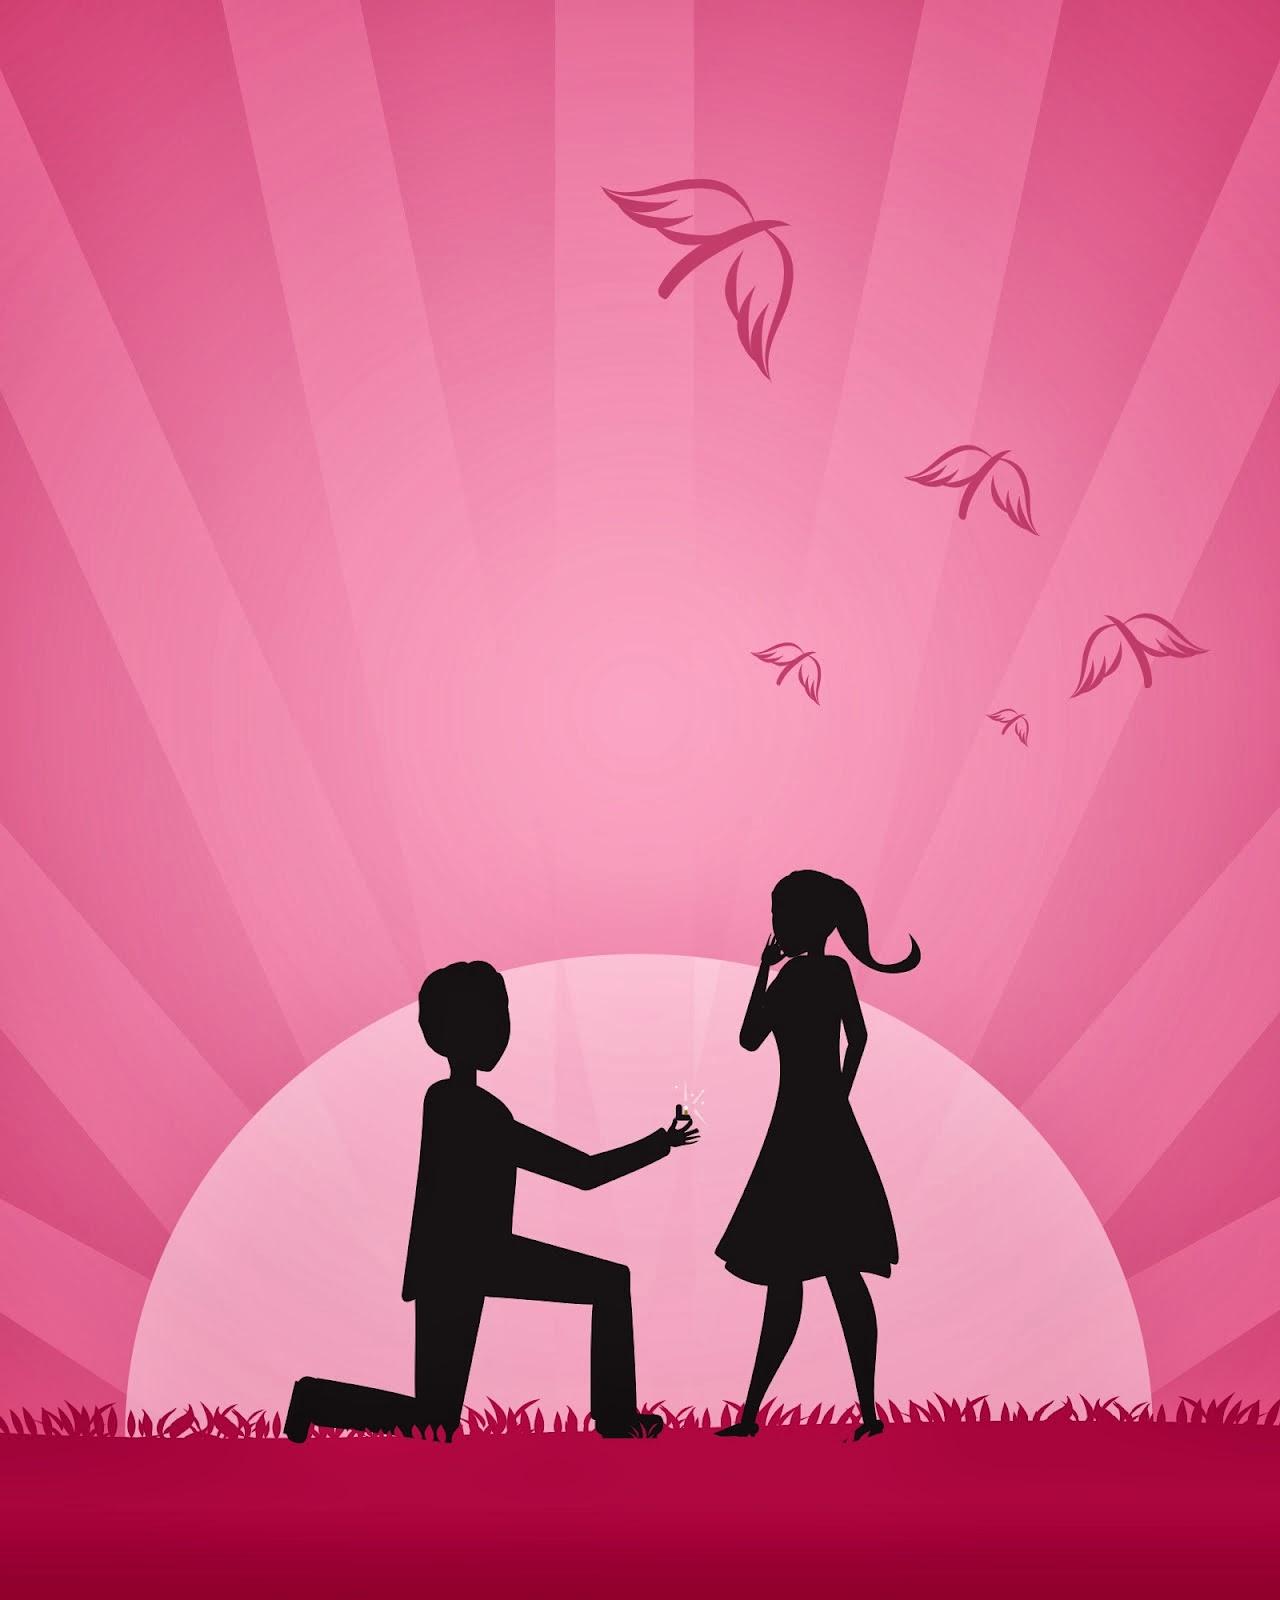 Happy Propose Day (8th February 2014) Lovely HD Wallpaper and Pics